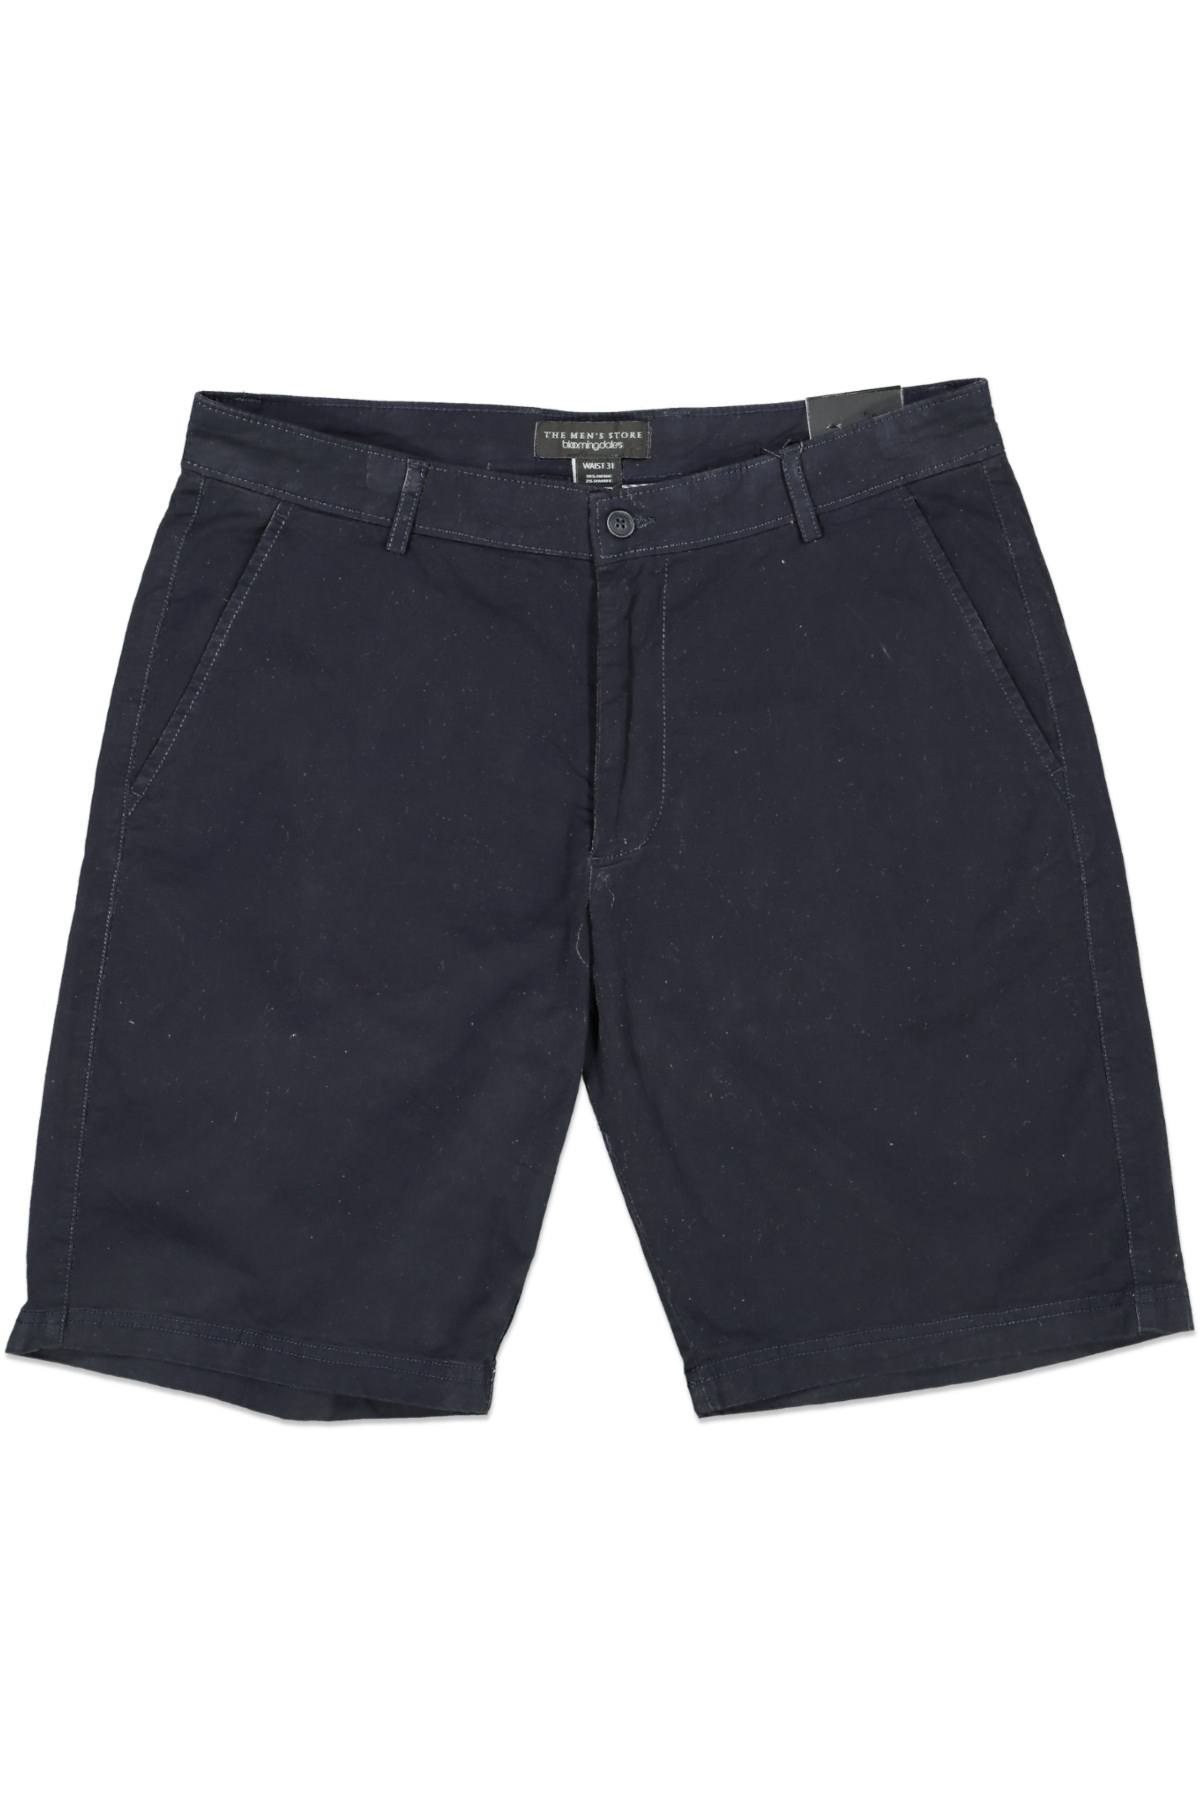 Bloomingdales Mens Flat Front Twill Cotton Stretch 9.5" Shorts Dark Navy